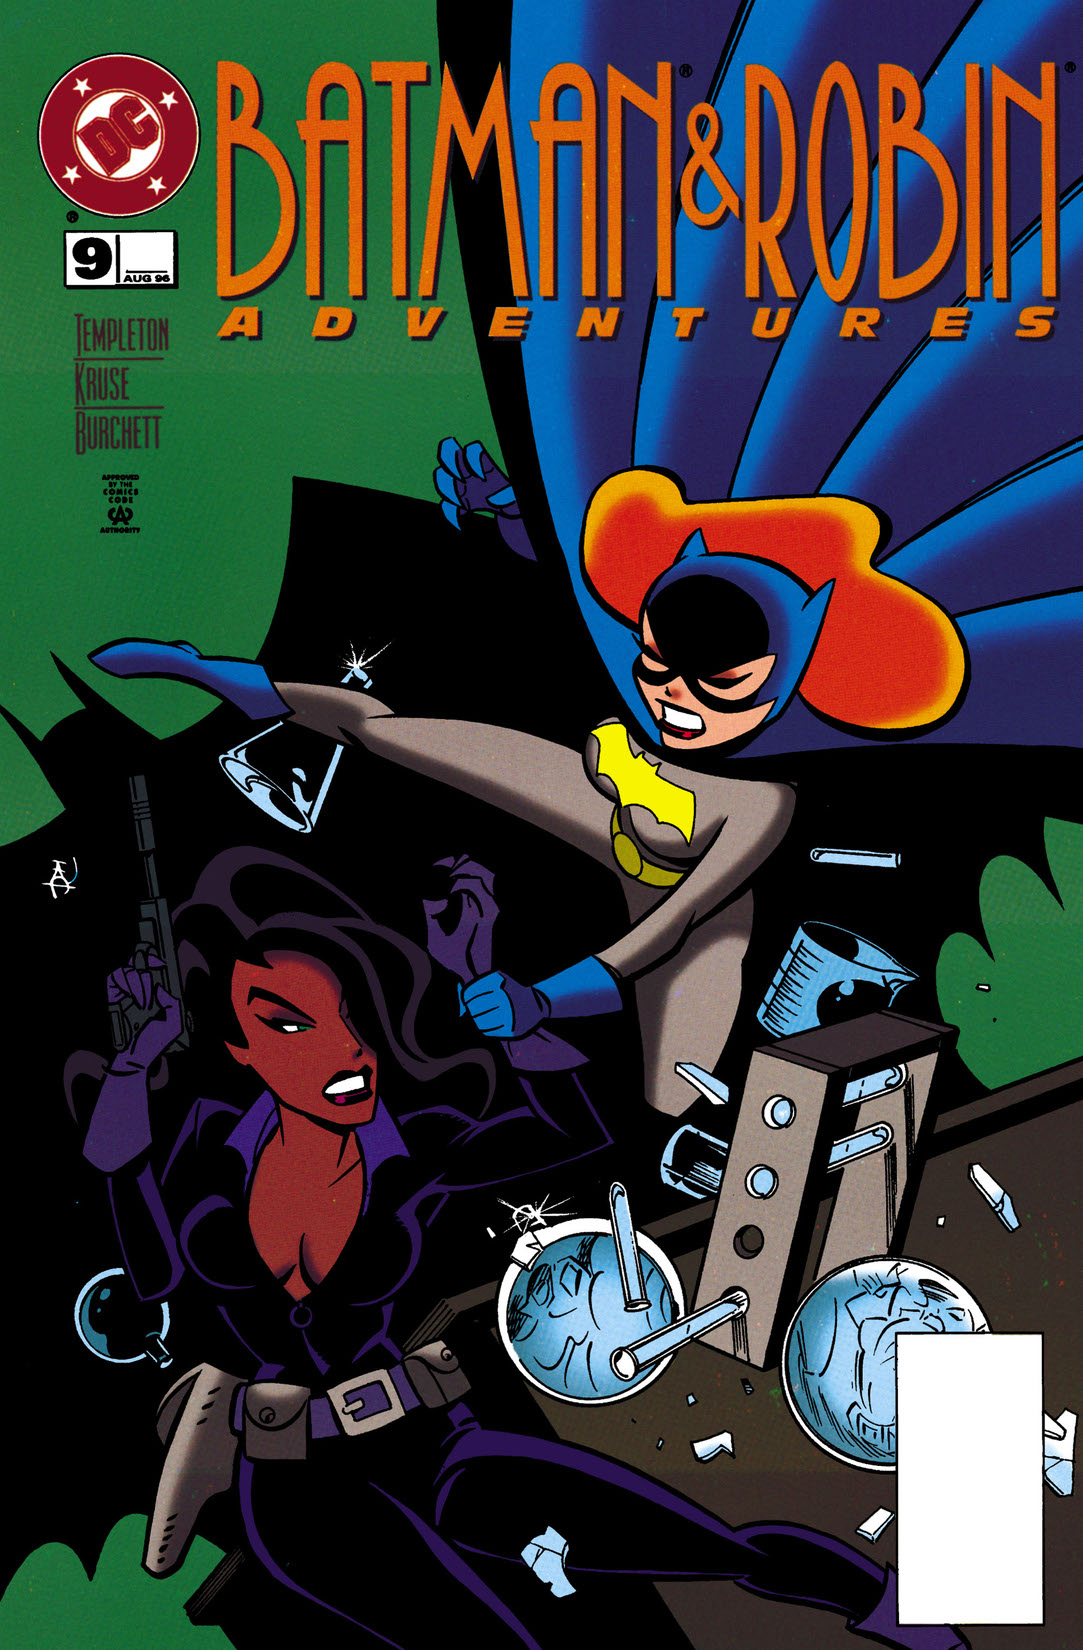 The Batman and Robin Adventures #9 preview images